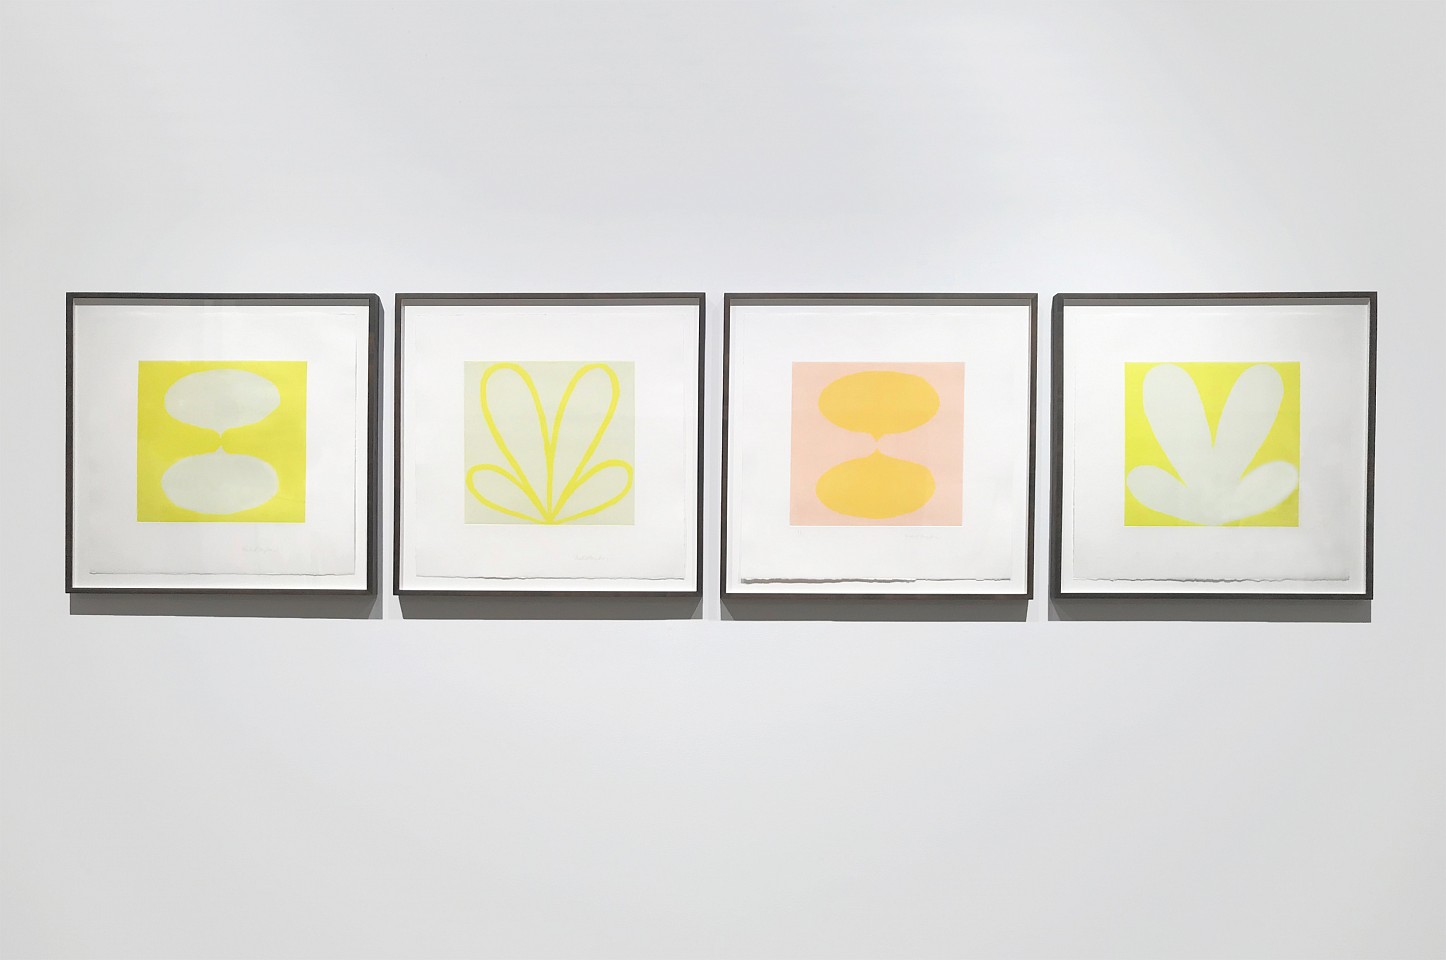 Isabel Bigelow
Yellow Monoprint Group Installation Shot, 2019
monoprint, 25.5 x 25 inches framed, installation is approximately 25.5 x 106 inches